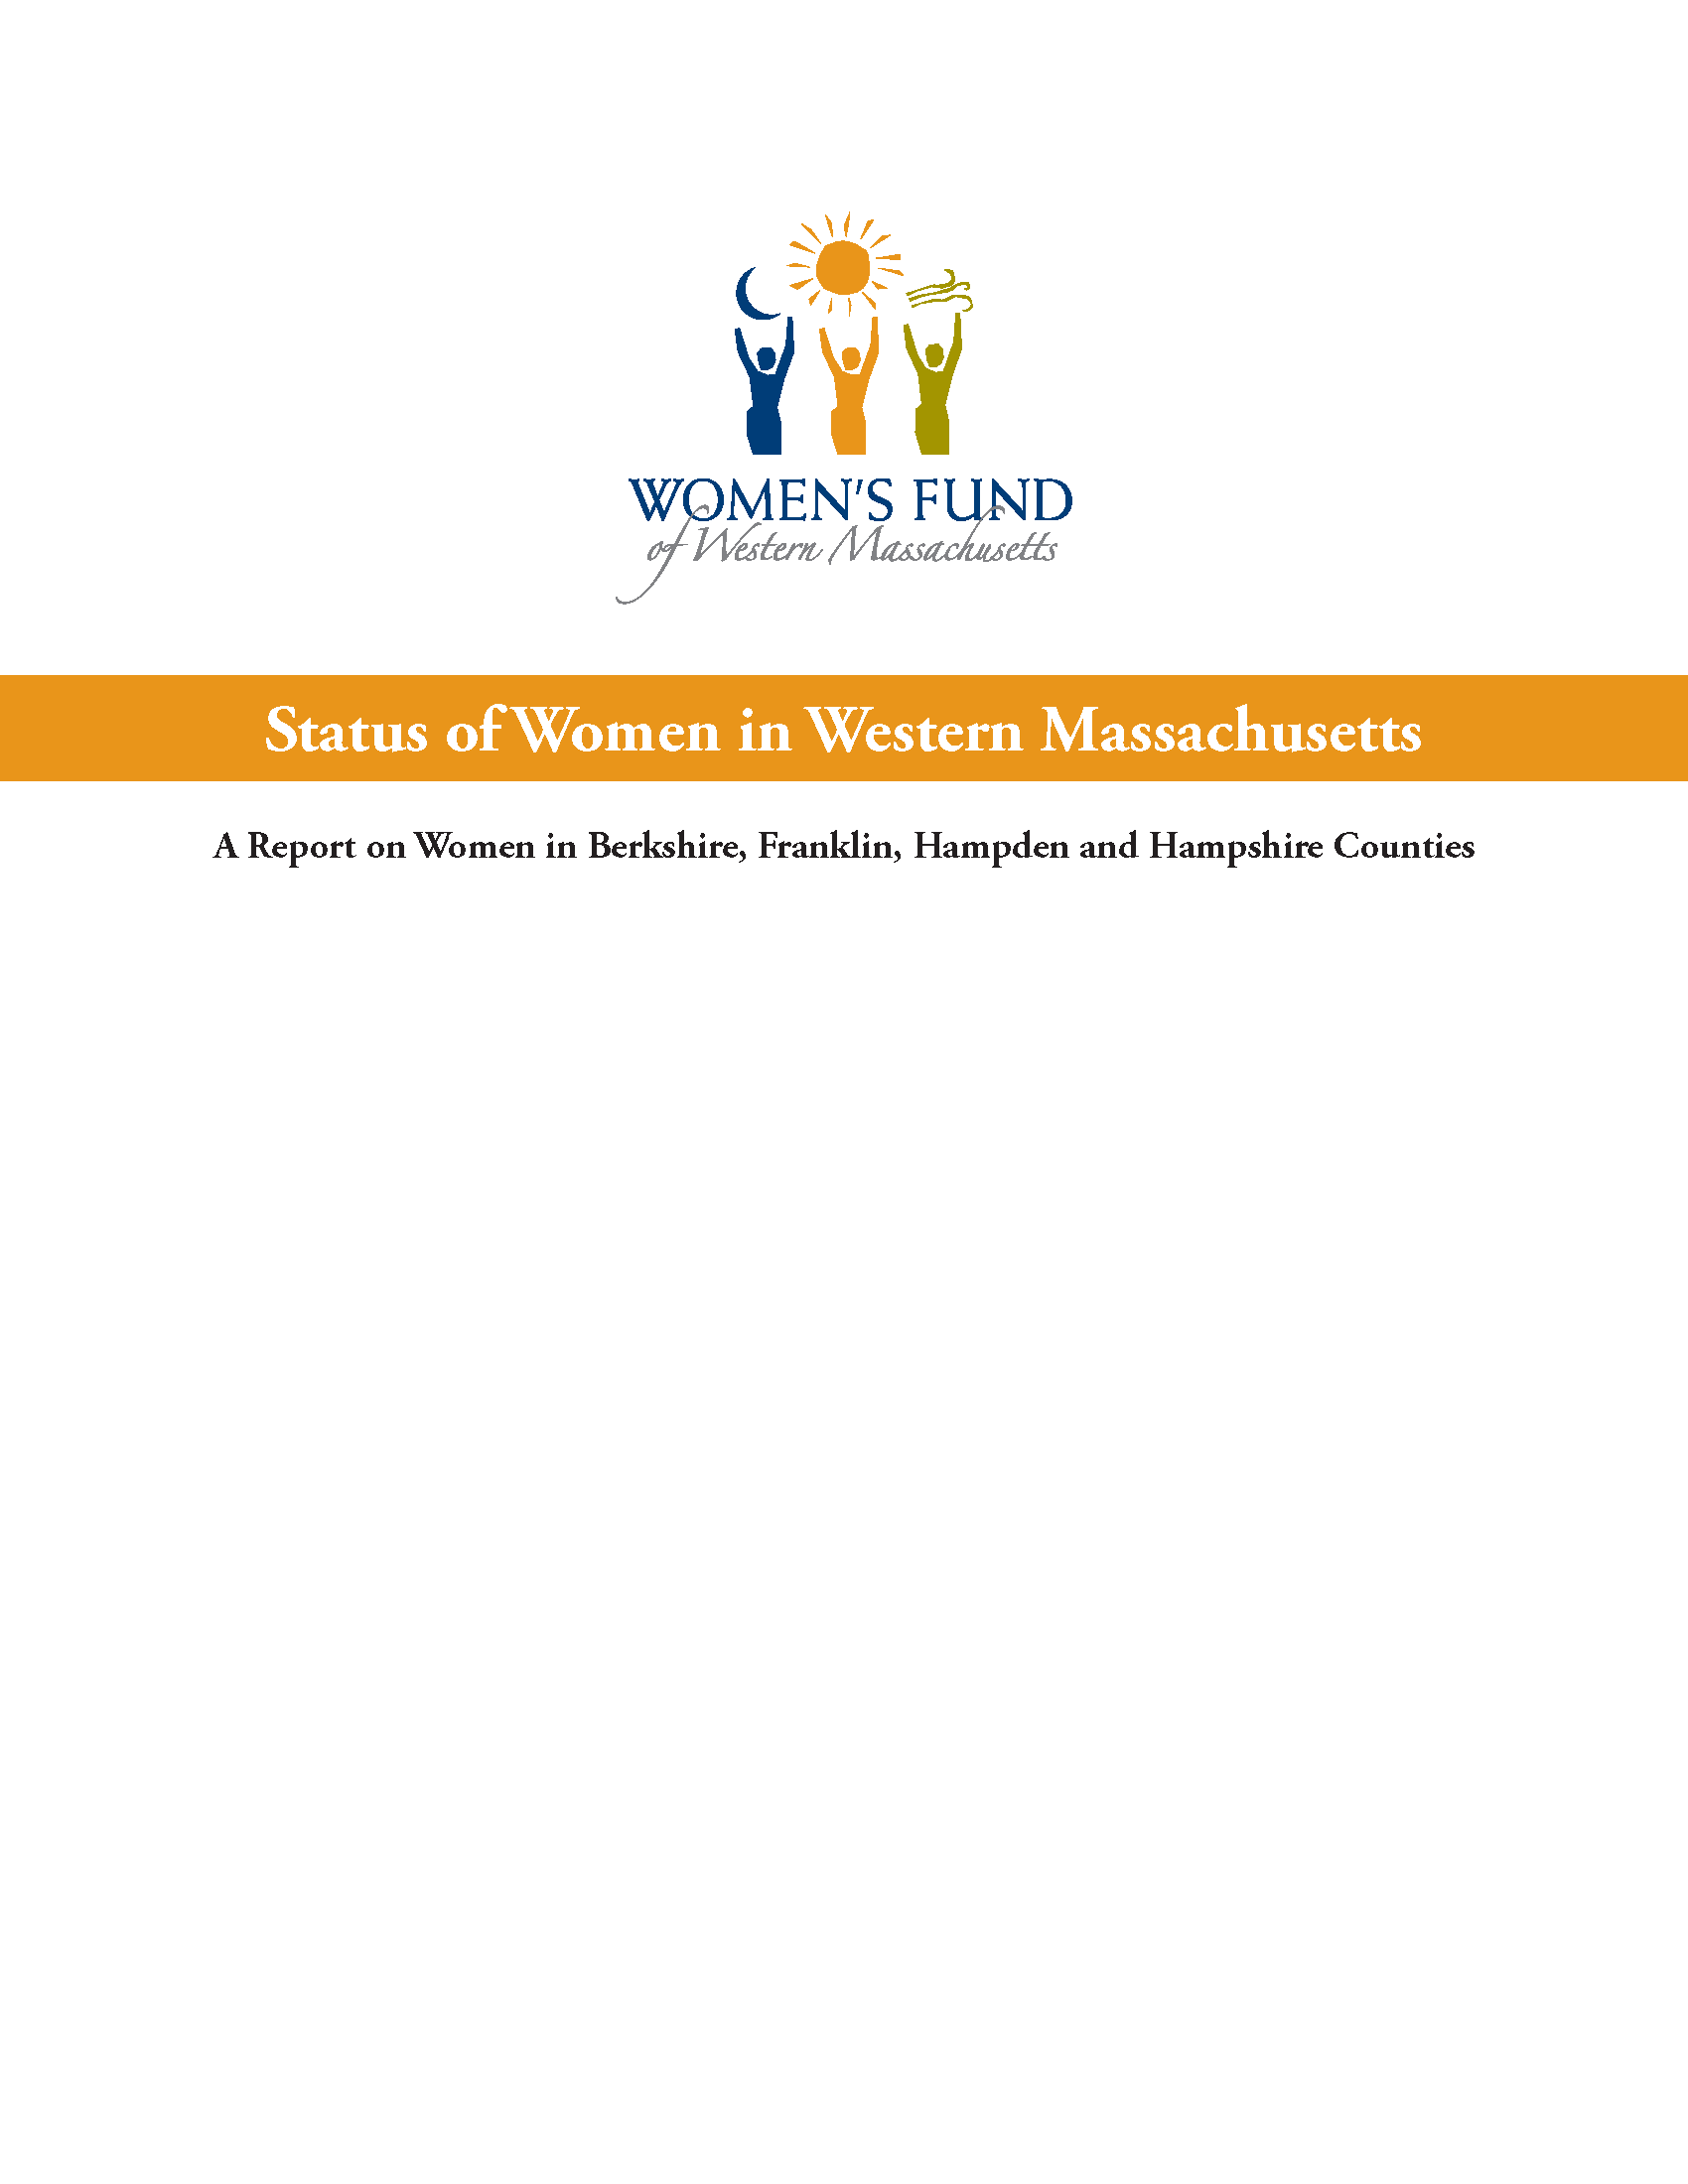 Snapshot image of the 2013 report on the Status of Women in Western Mass.